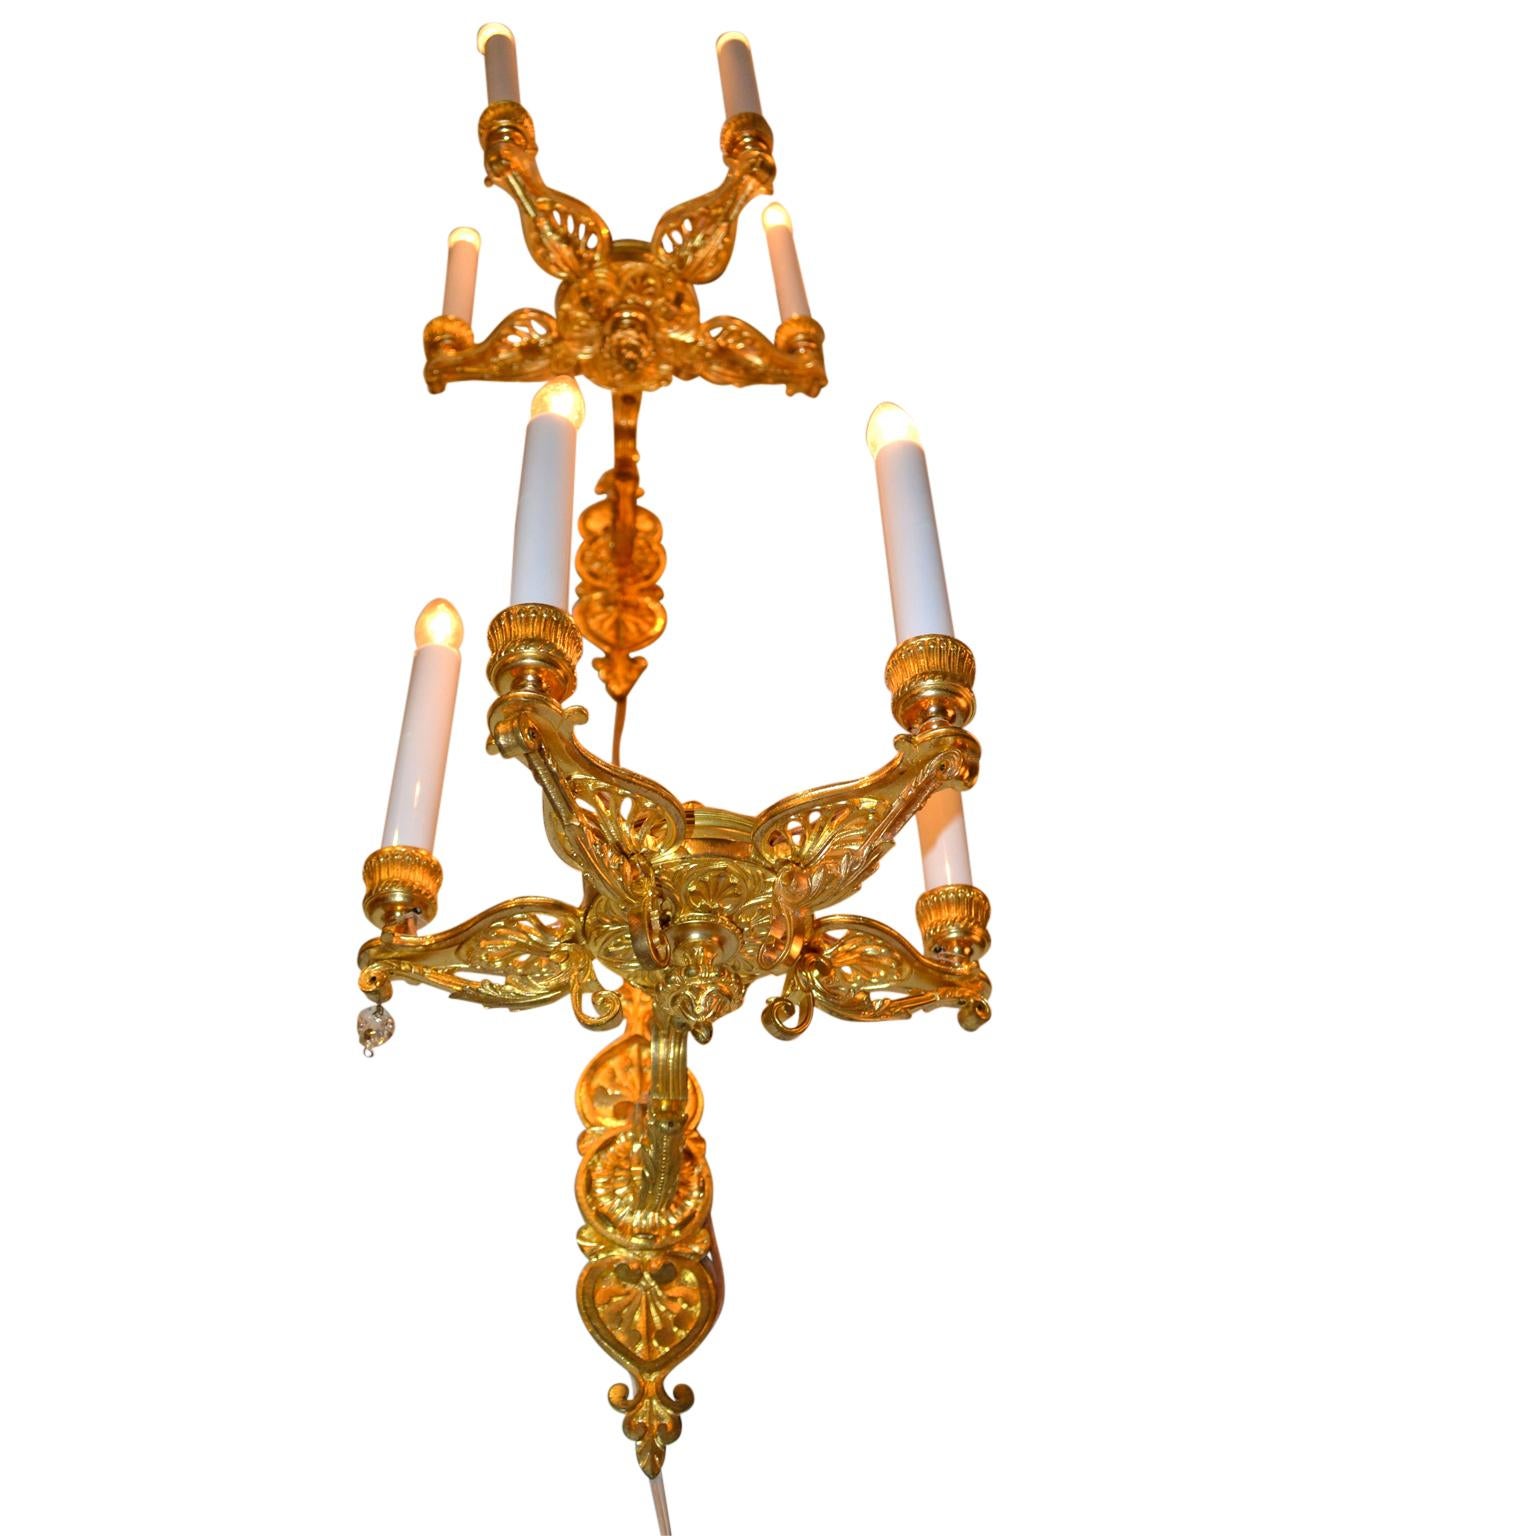 Napoleon III Pair of French Late 19th Century Empire Style Sconces For Sale